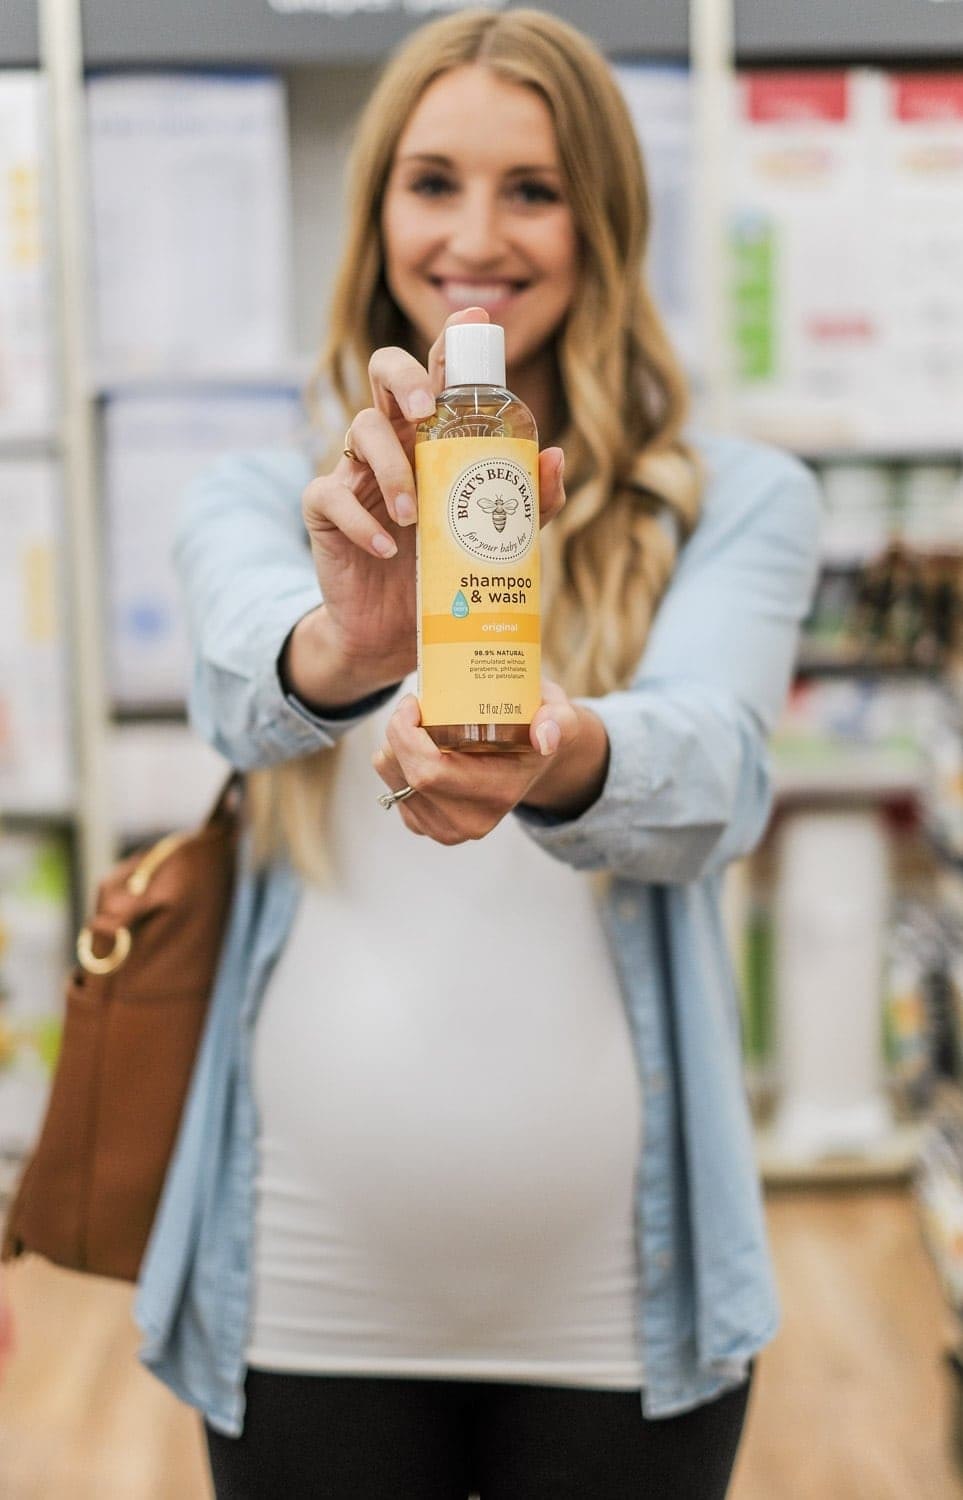 pregnant woman holding baby shampoo in buy buy baby store